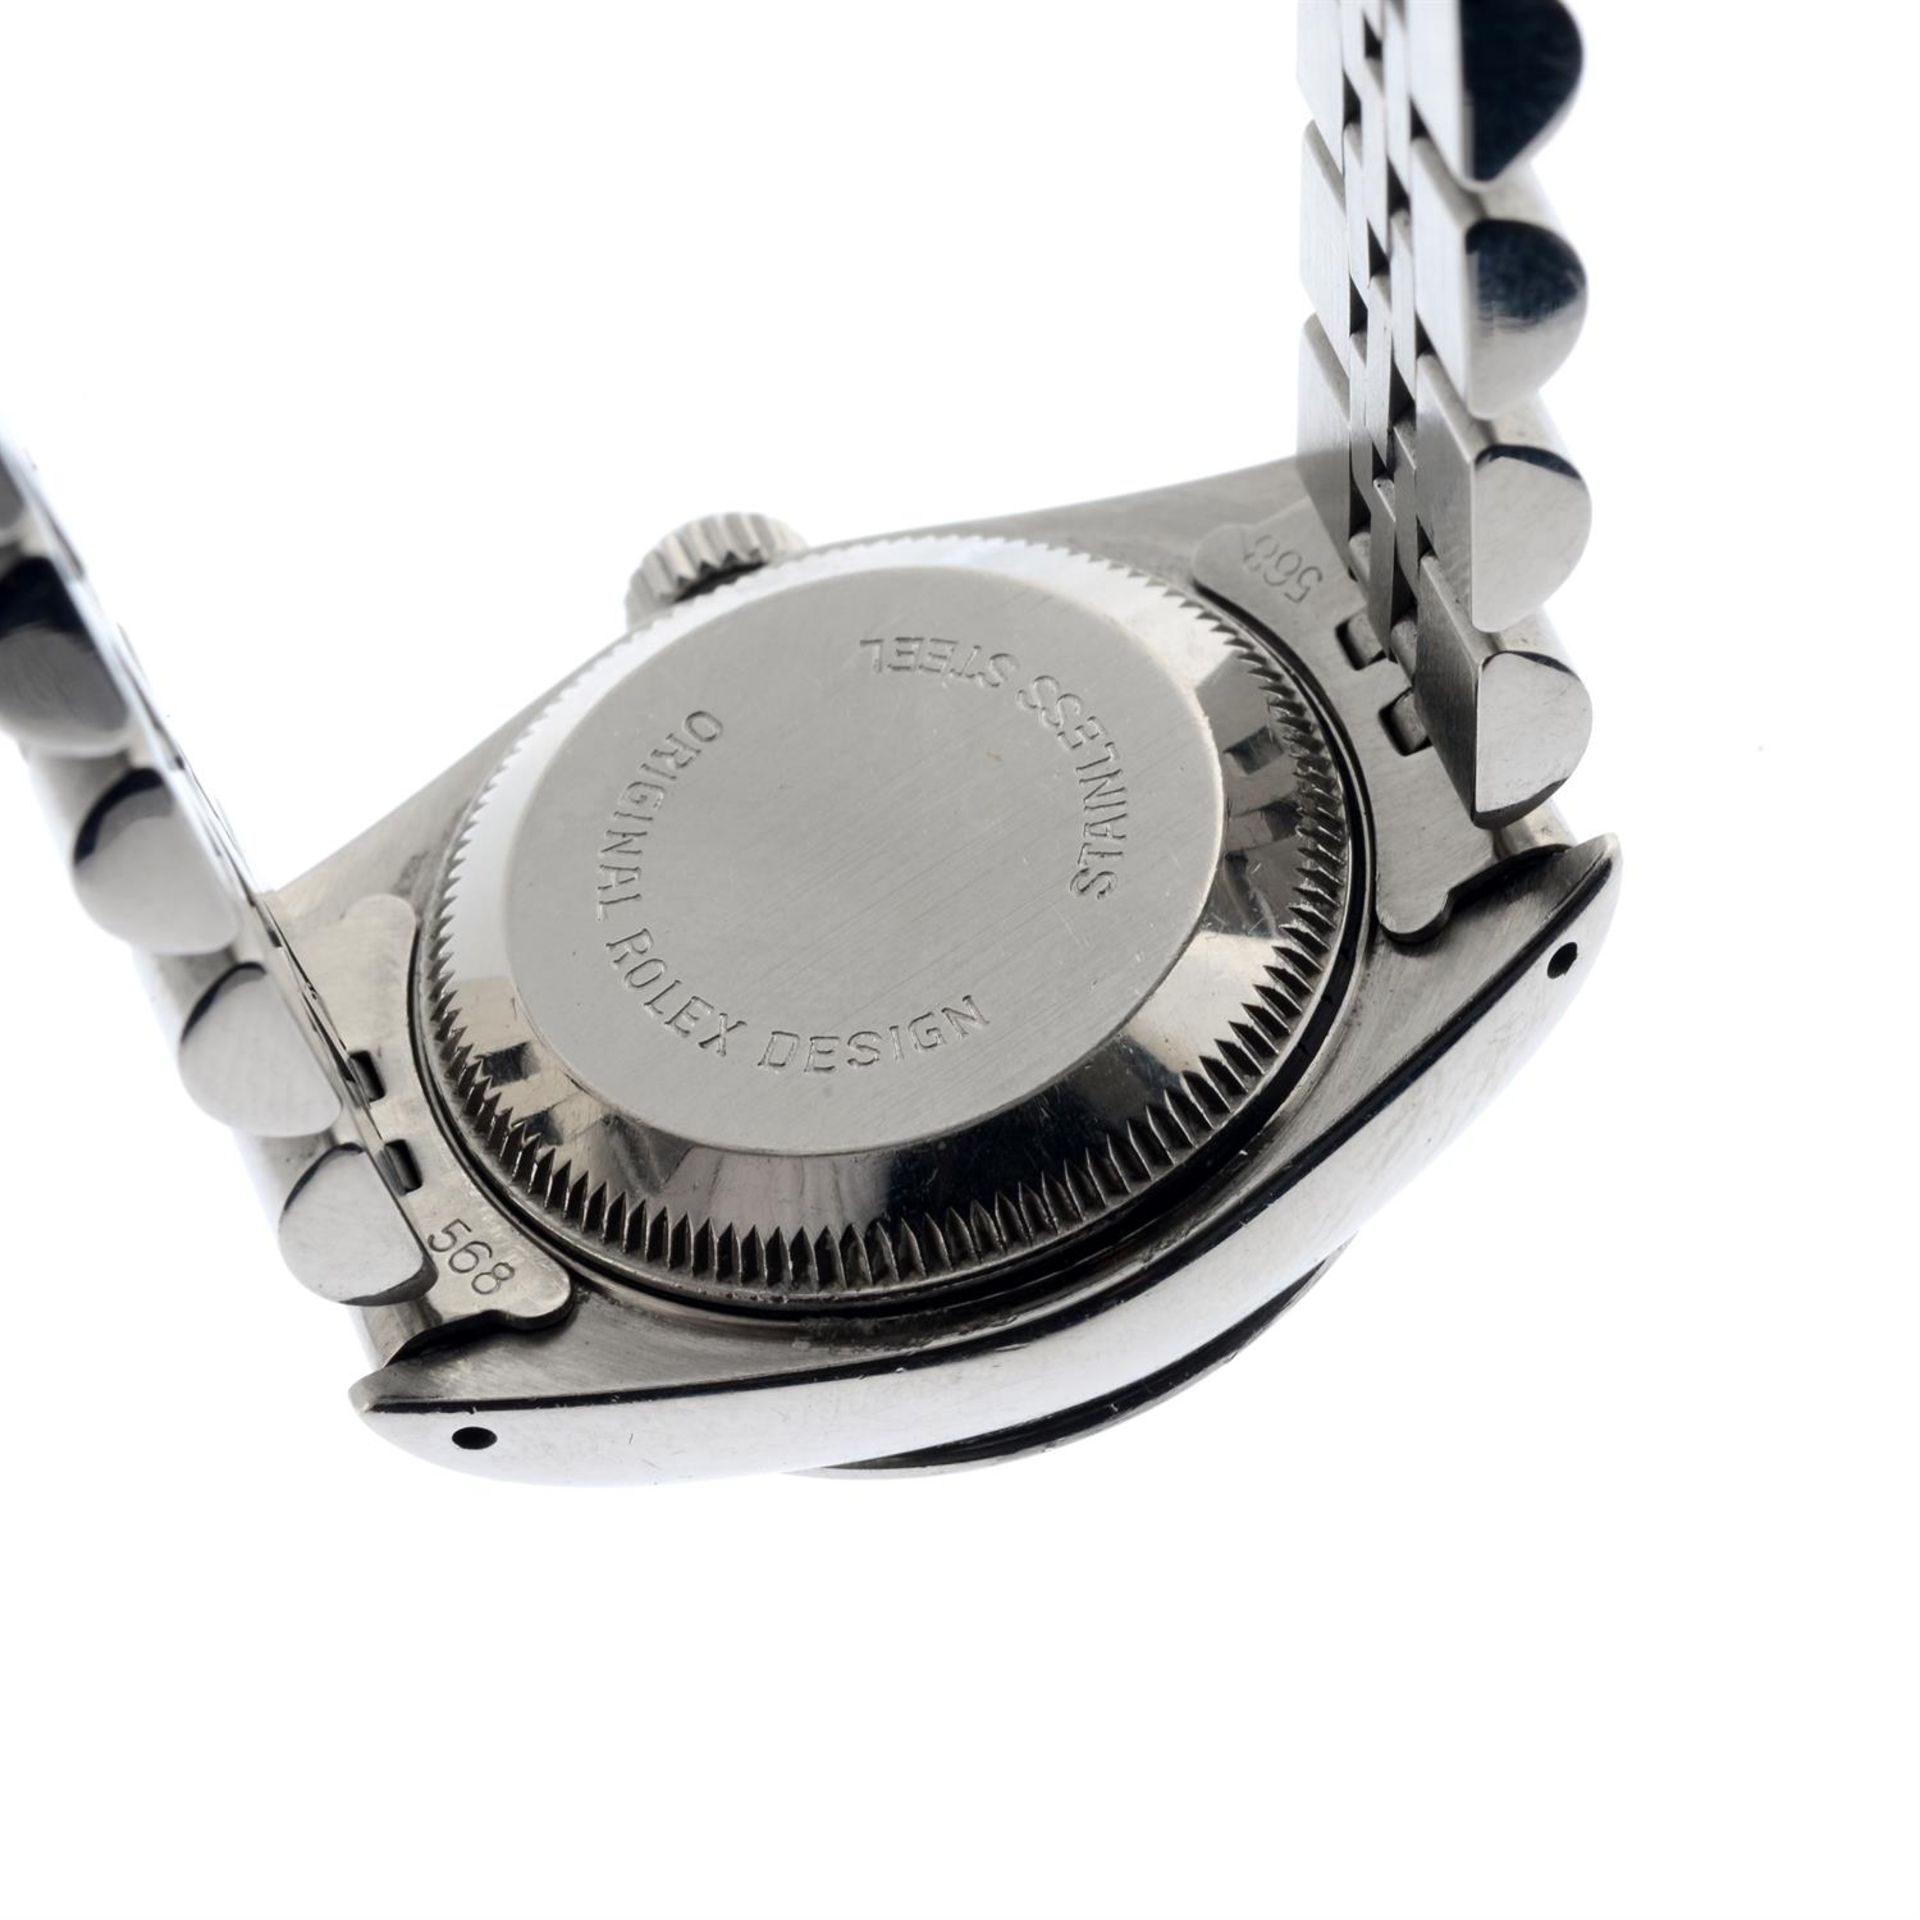 ROLEX - a stainless steel Oyster Perpetual Datejust bracelet watch, 26mm. - Image 2 of 5